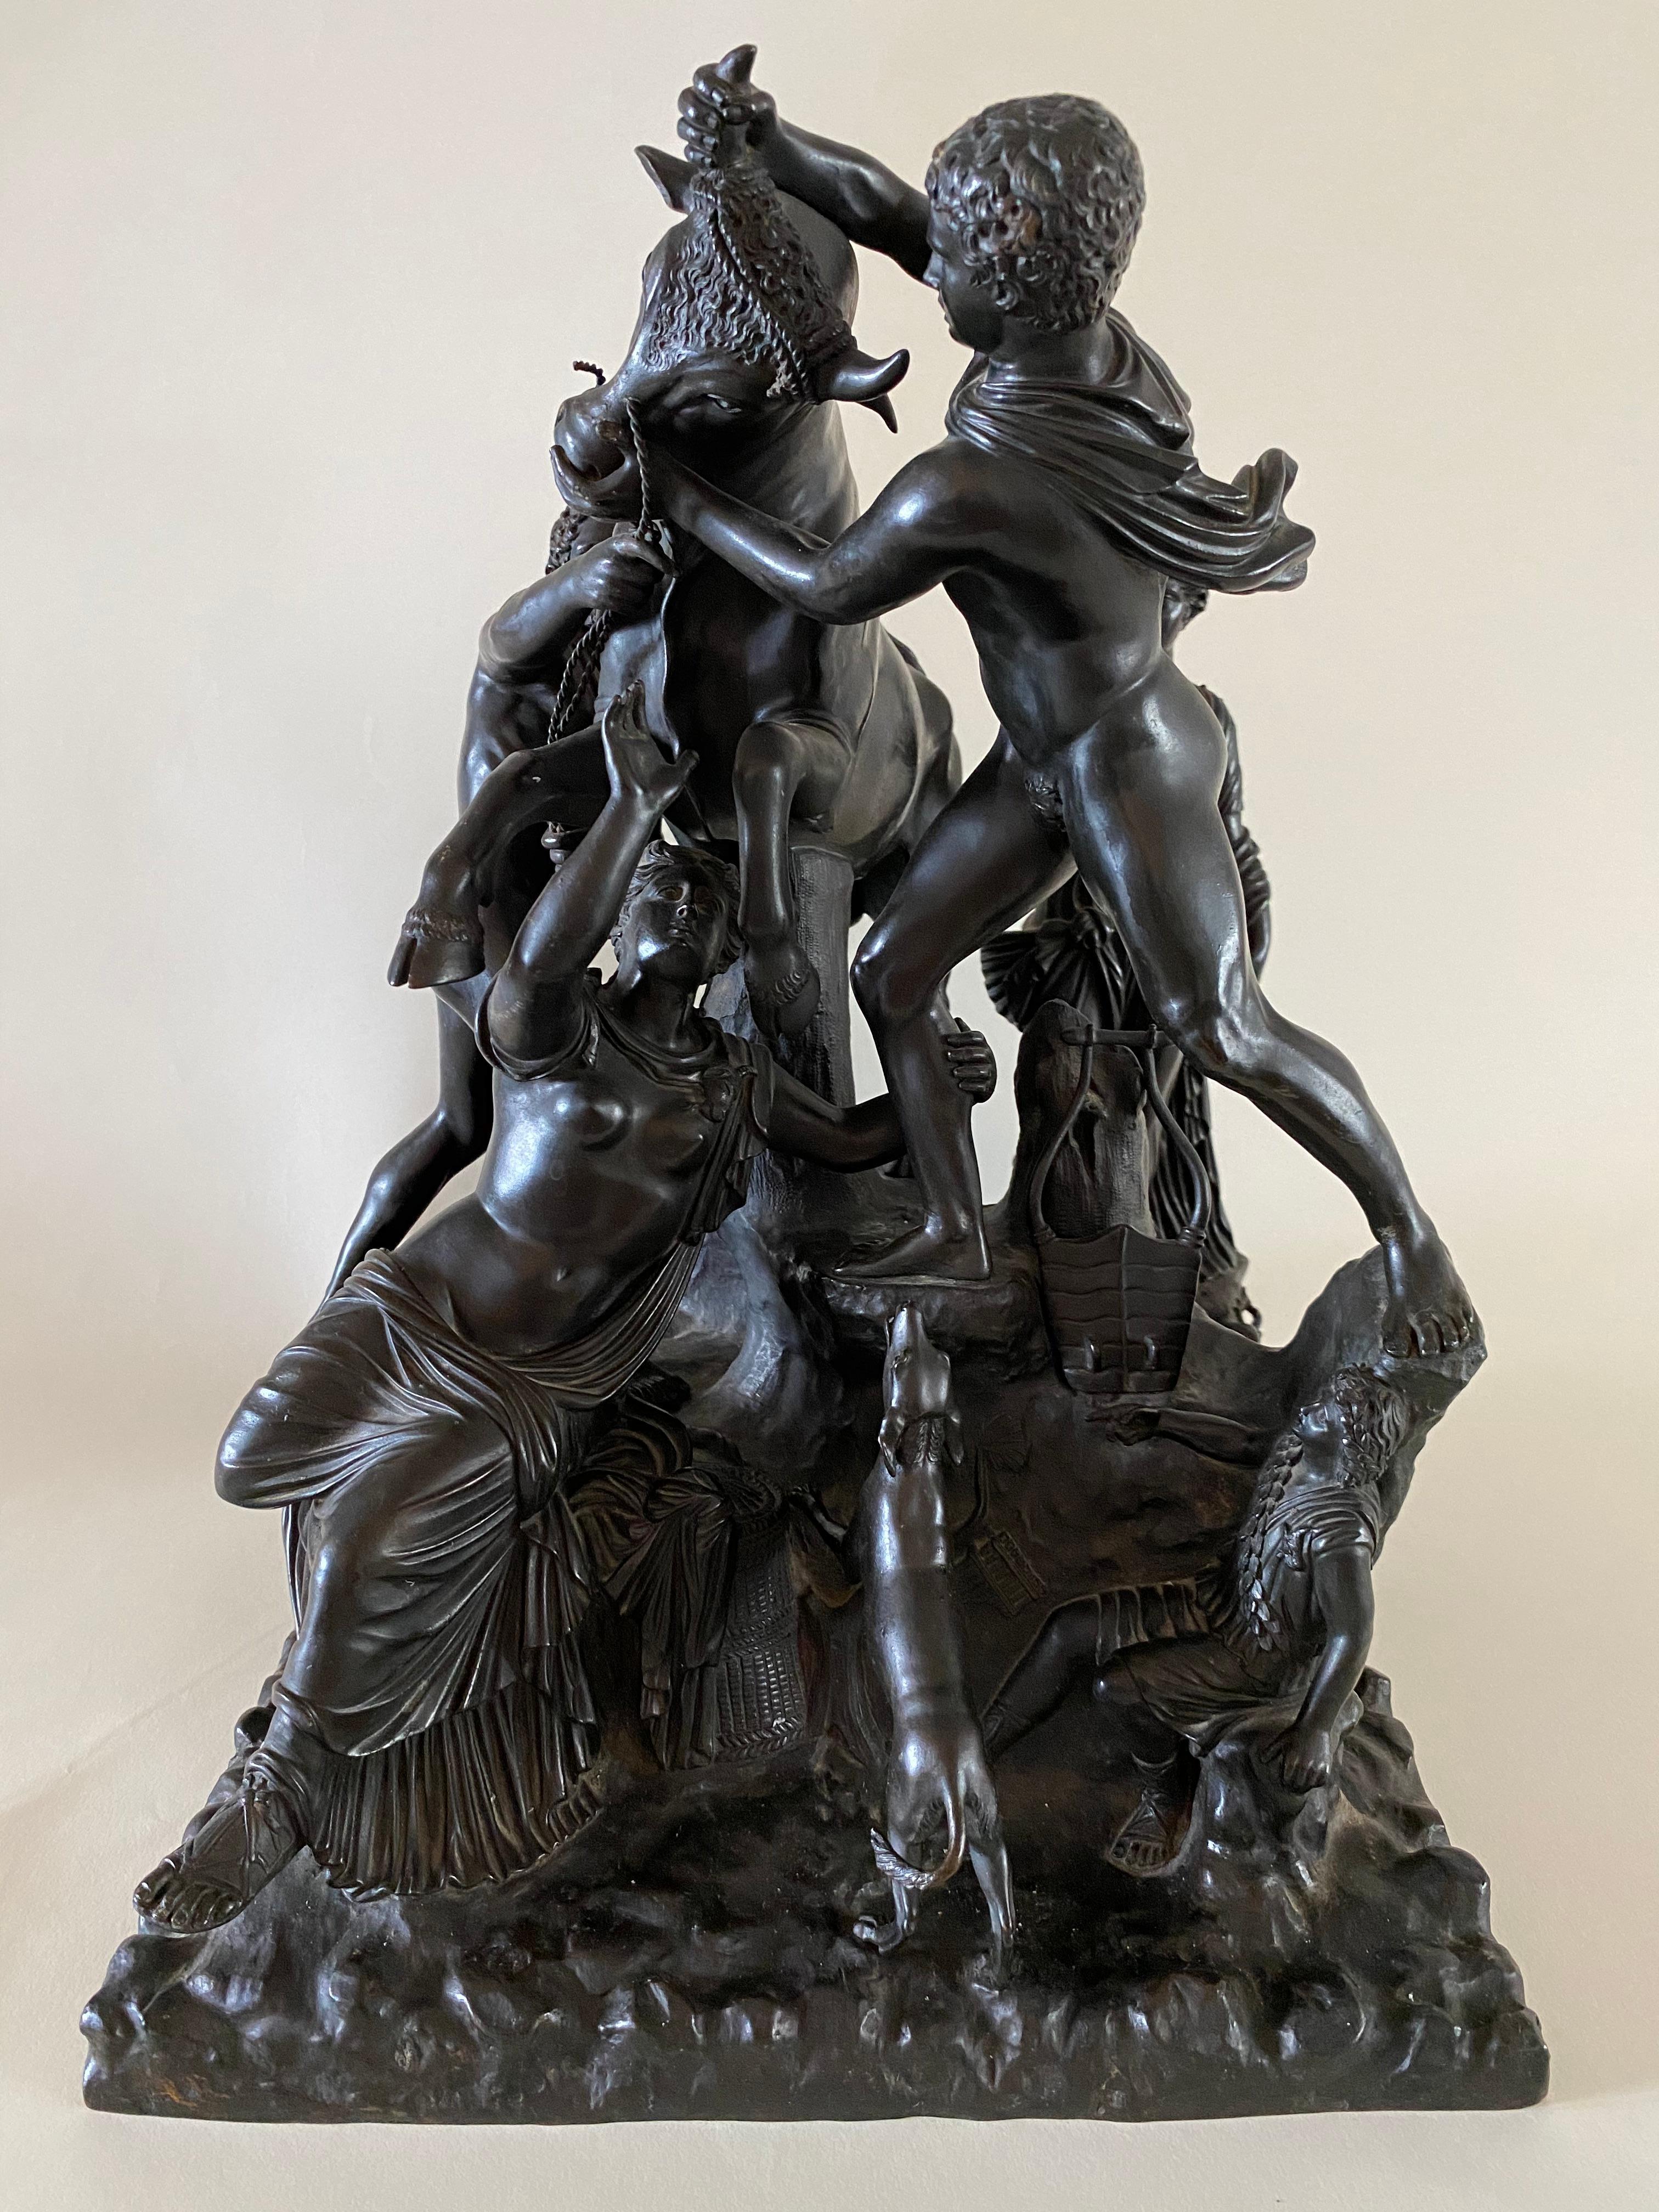 This Italian bronze sculpture group of the Farnese Bull, after the antique, is handsomely modeled and detailed throughout with a lovely blackish to cocoa brown patination, each separately cast figure centering an enraged bull while standing on a